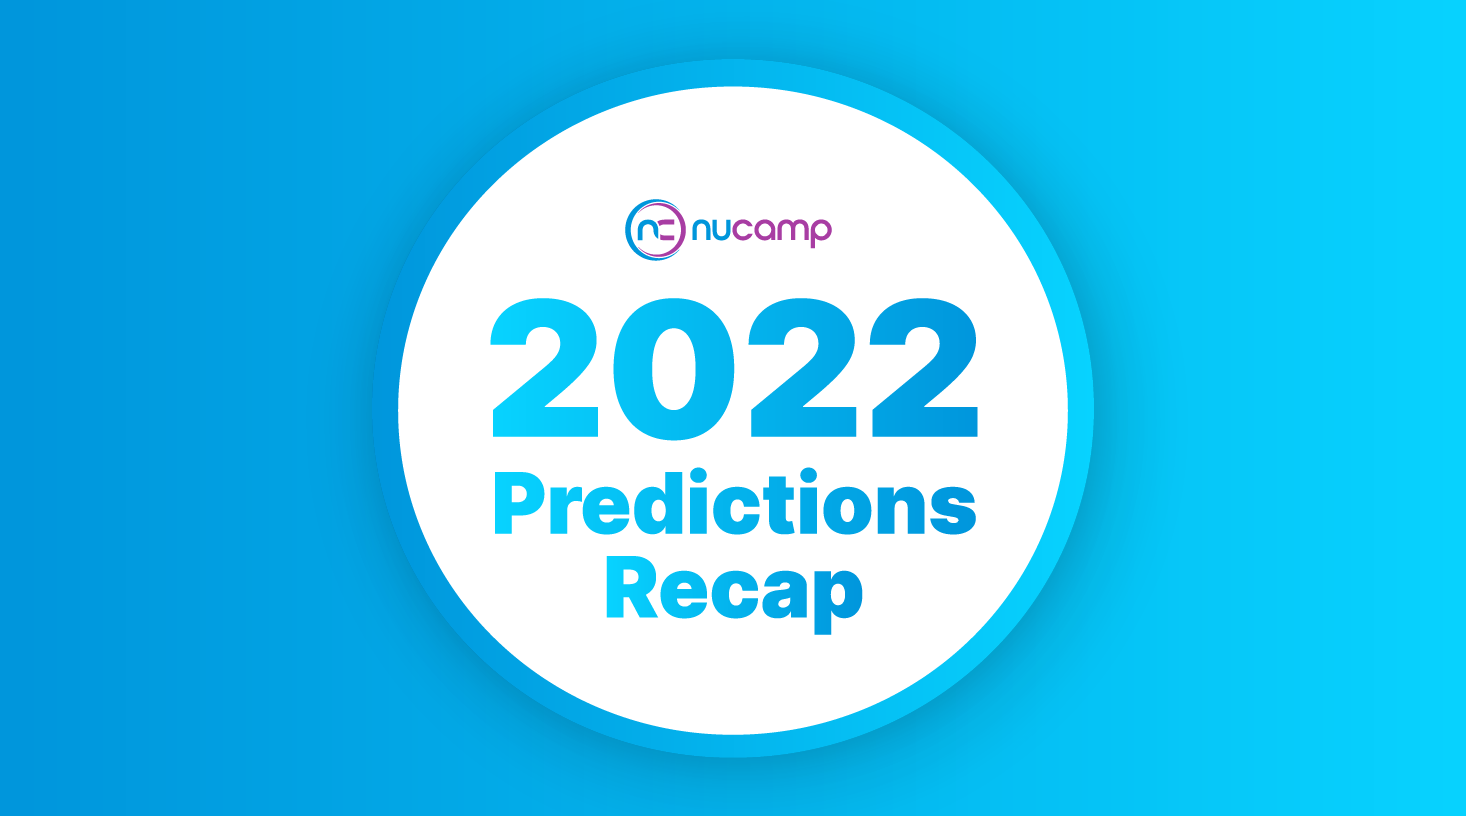 2022: Nucamp year end assessment of the tech education industry and online learning